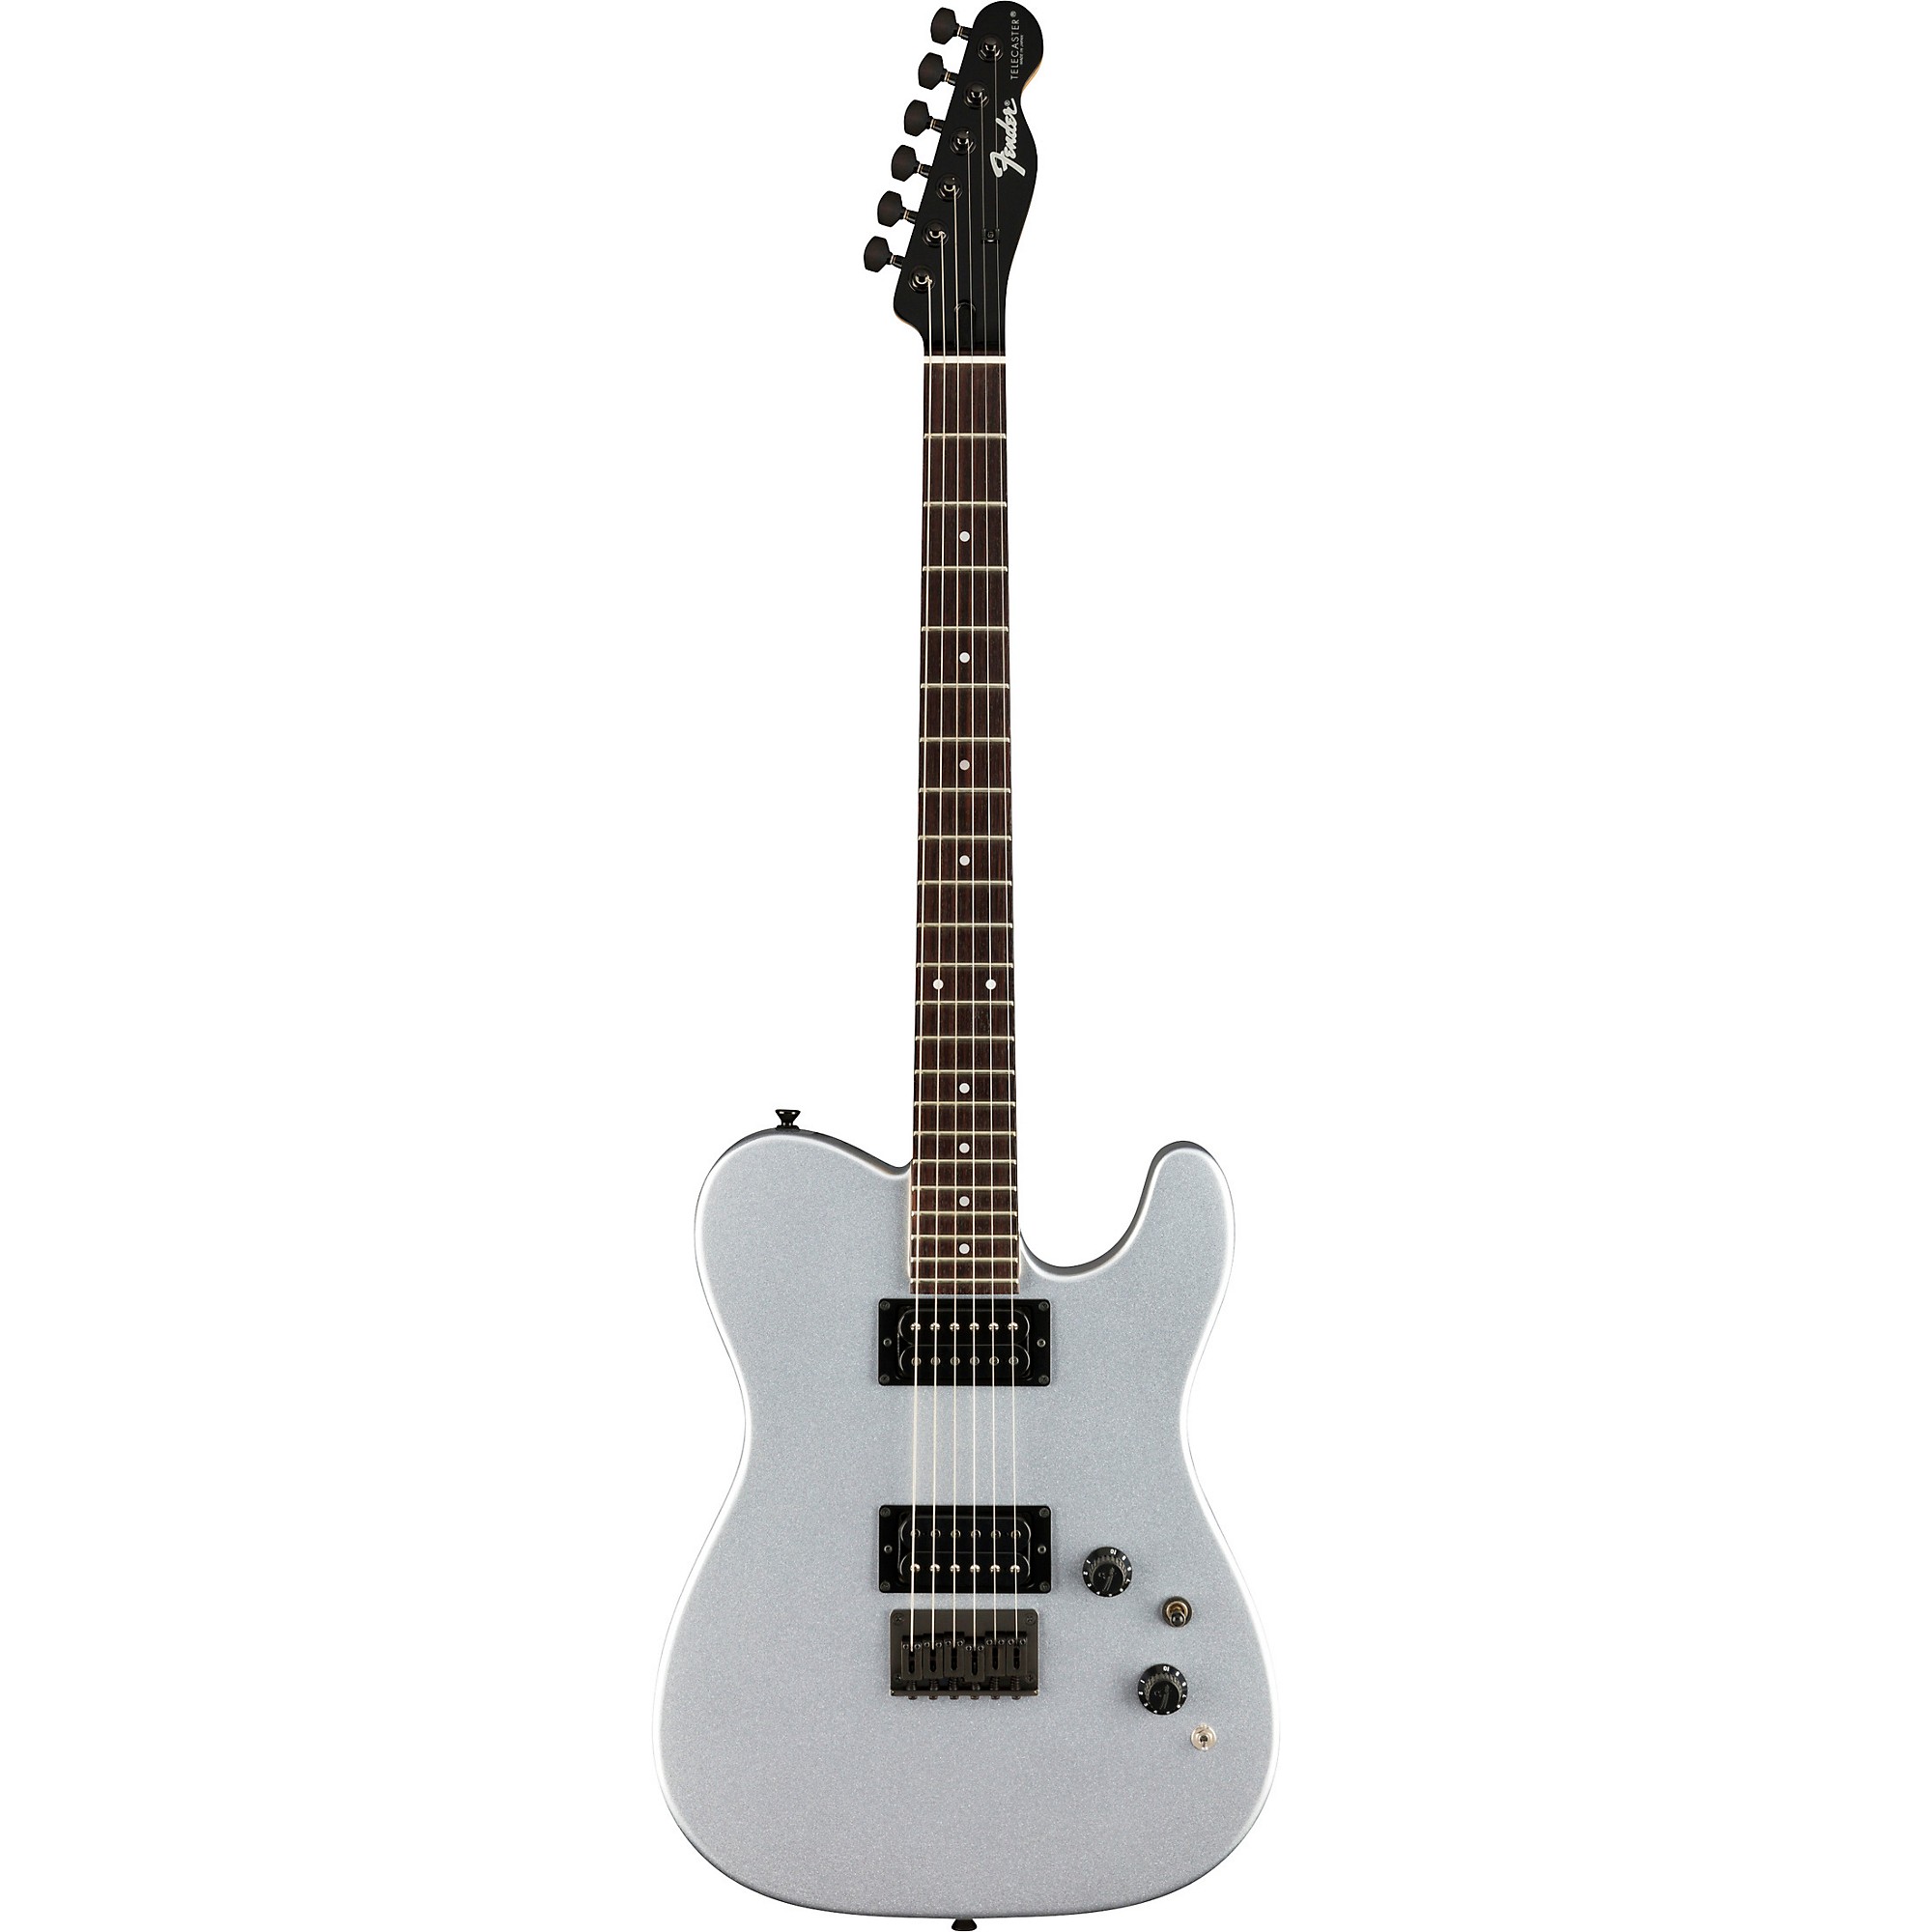 Fender Boxer Series Telecaster HH Electric Guitar - $899.99 and Free Shipping